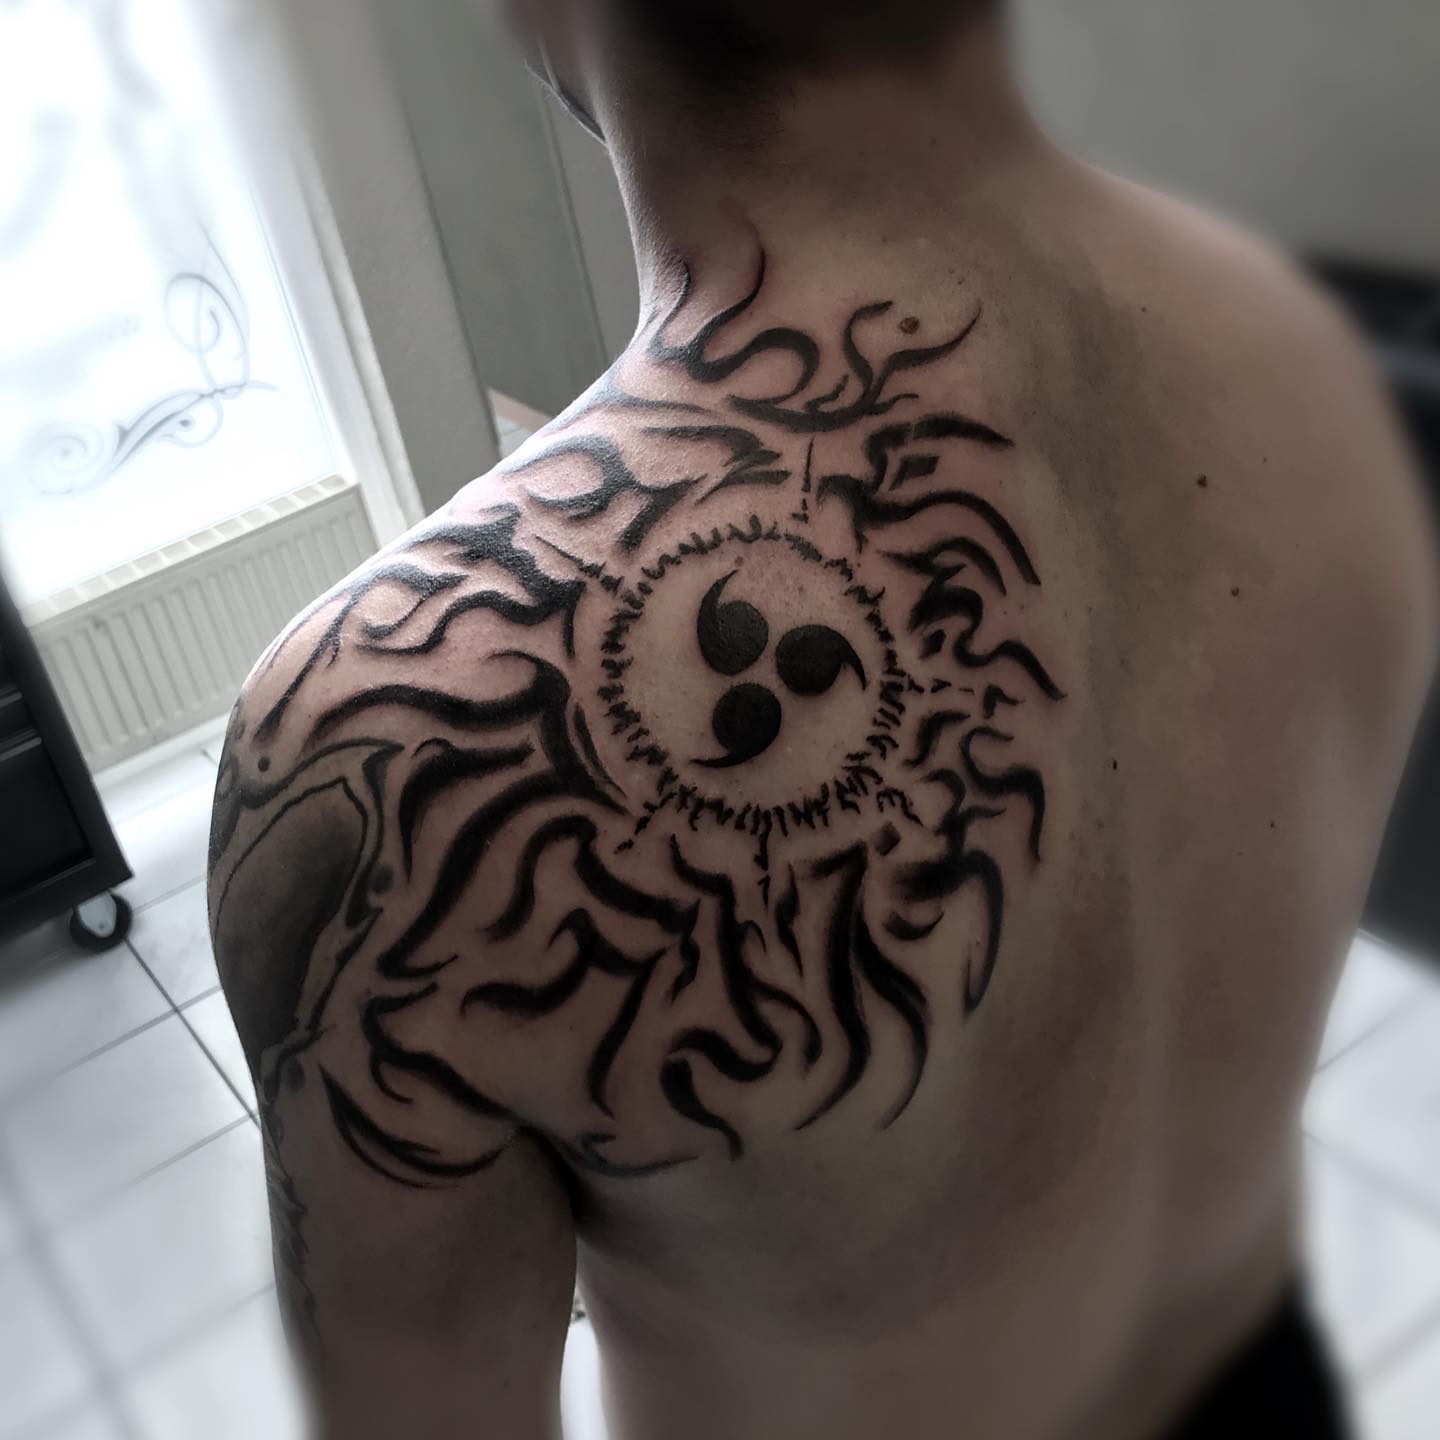 ᴄ ʜ ᴇ ʟ  ᴛ ᴀ ᴛ ᴛ ᴏ ᴏ ꜱ on Instagram Shiki Fūjin Reaper Death Seal for  Nicks first tattoo  Lines healed shading fresh Swipe to see the